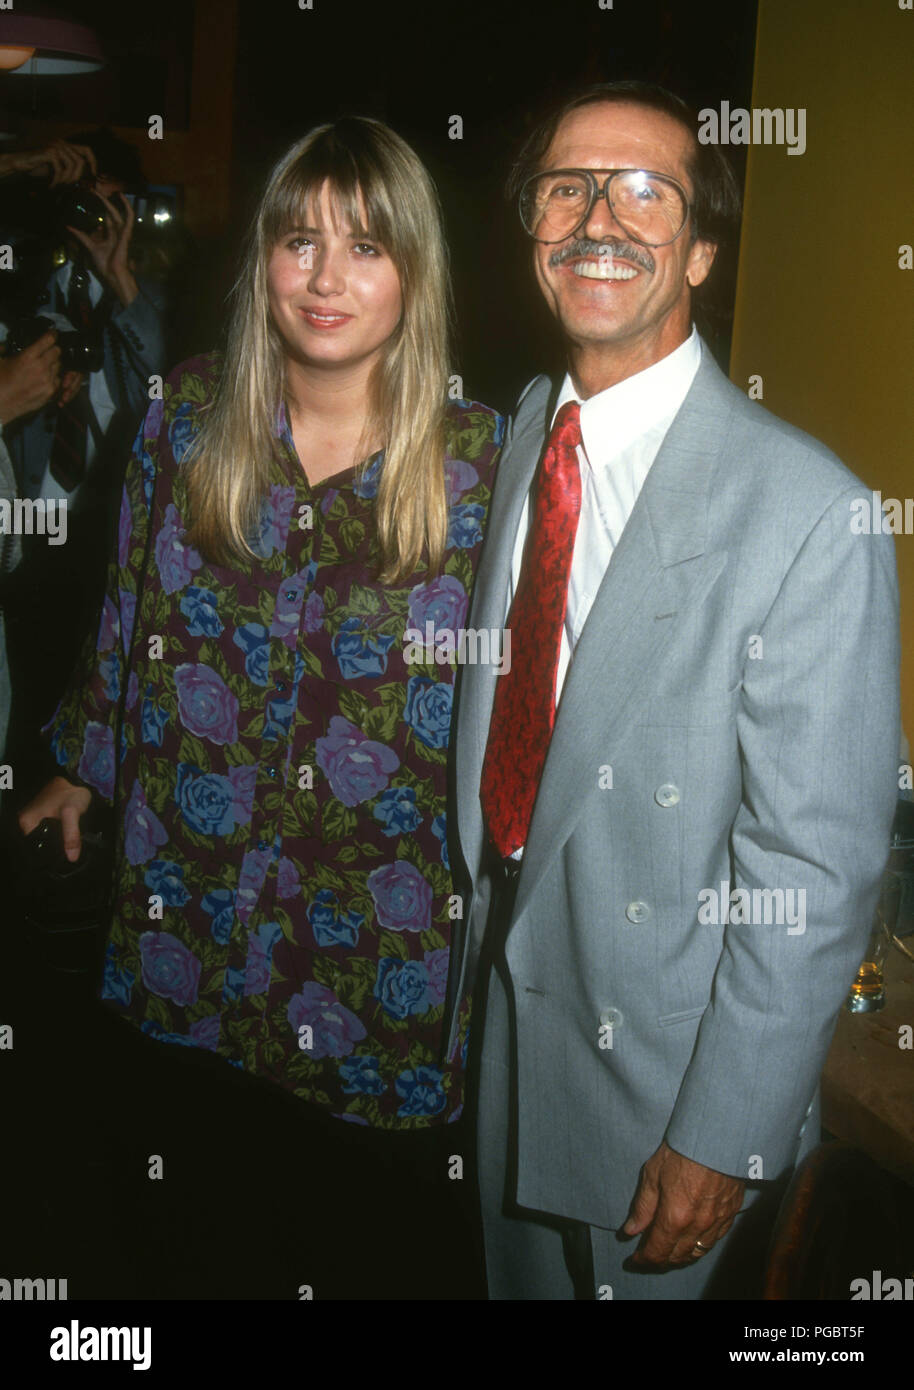 WEST HOLLYWOOD, CA - AUGUST 11: (L-R) Chastity Bono (Chaz Bono) and father Sonny Bono attend Grand Opening of Bono's Restaurant on August 11, 1992 at Bono's Restaurant on Melrose Avenue in West Hollywood, California. Photo by Barry King/Alamy Stock Photo Stock Photo